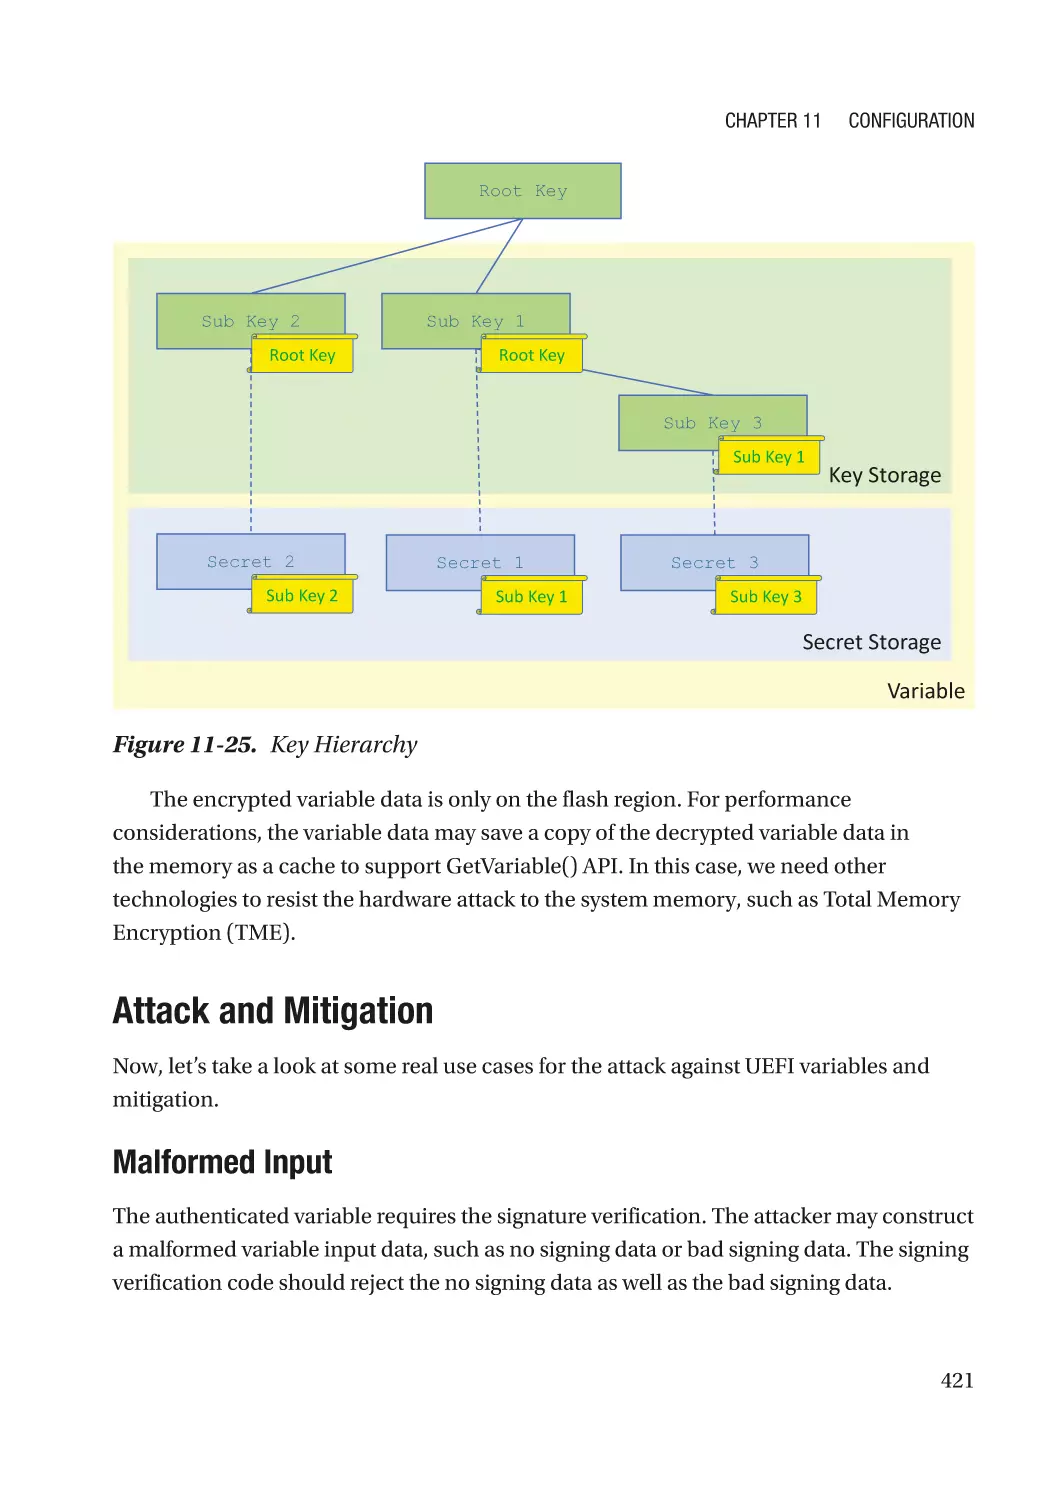 Attack and Mitigation
Malformed Input